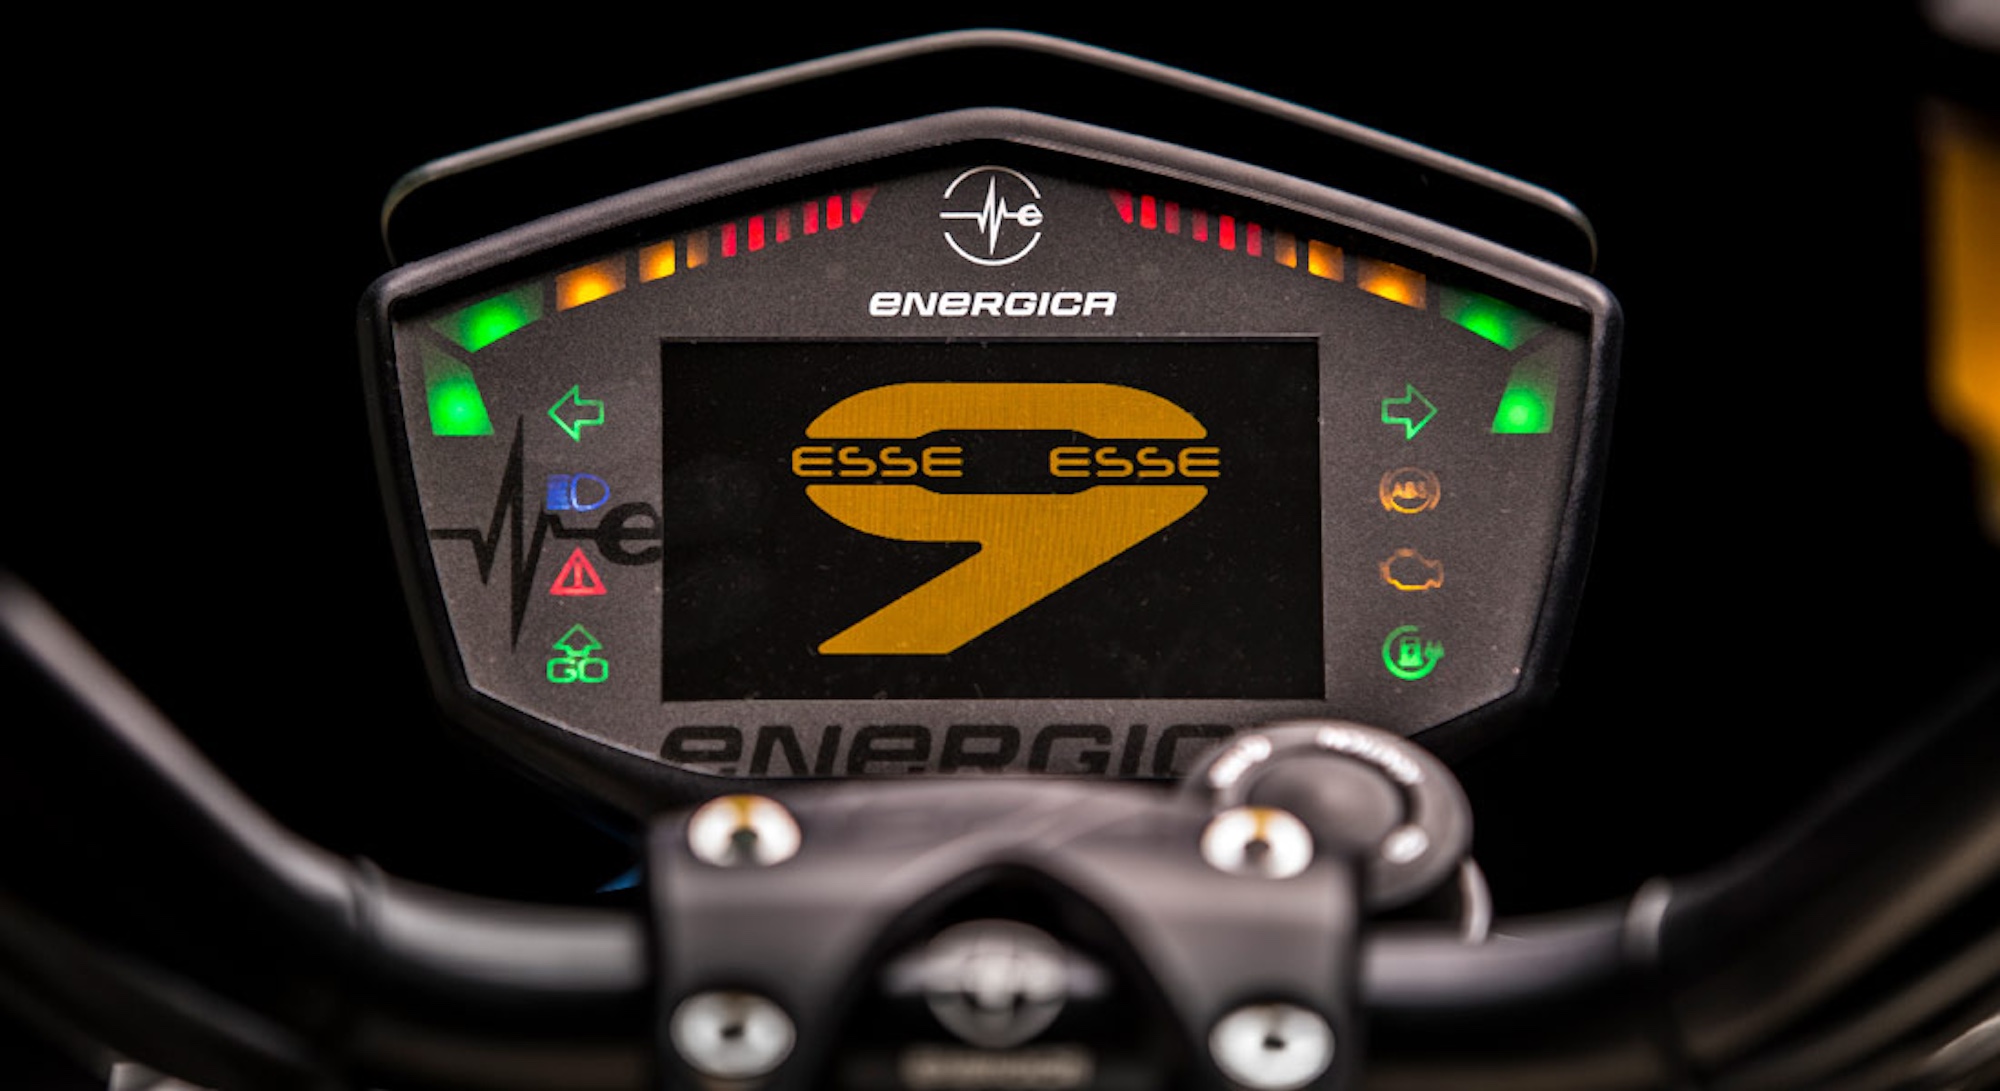 A view of an Energica dash. Media provided by Energica.